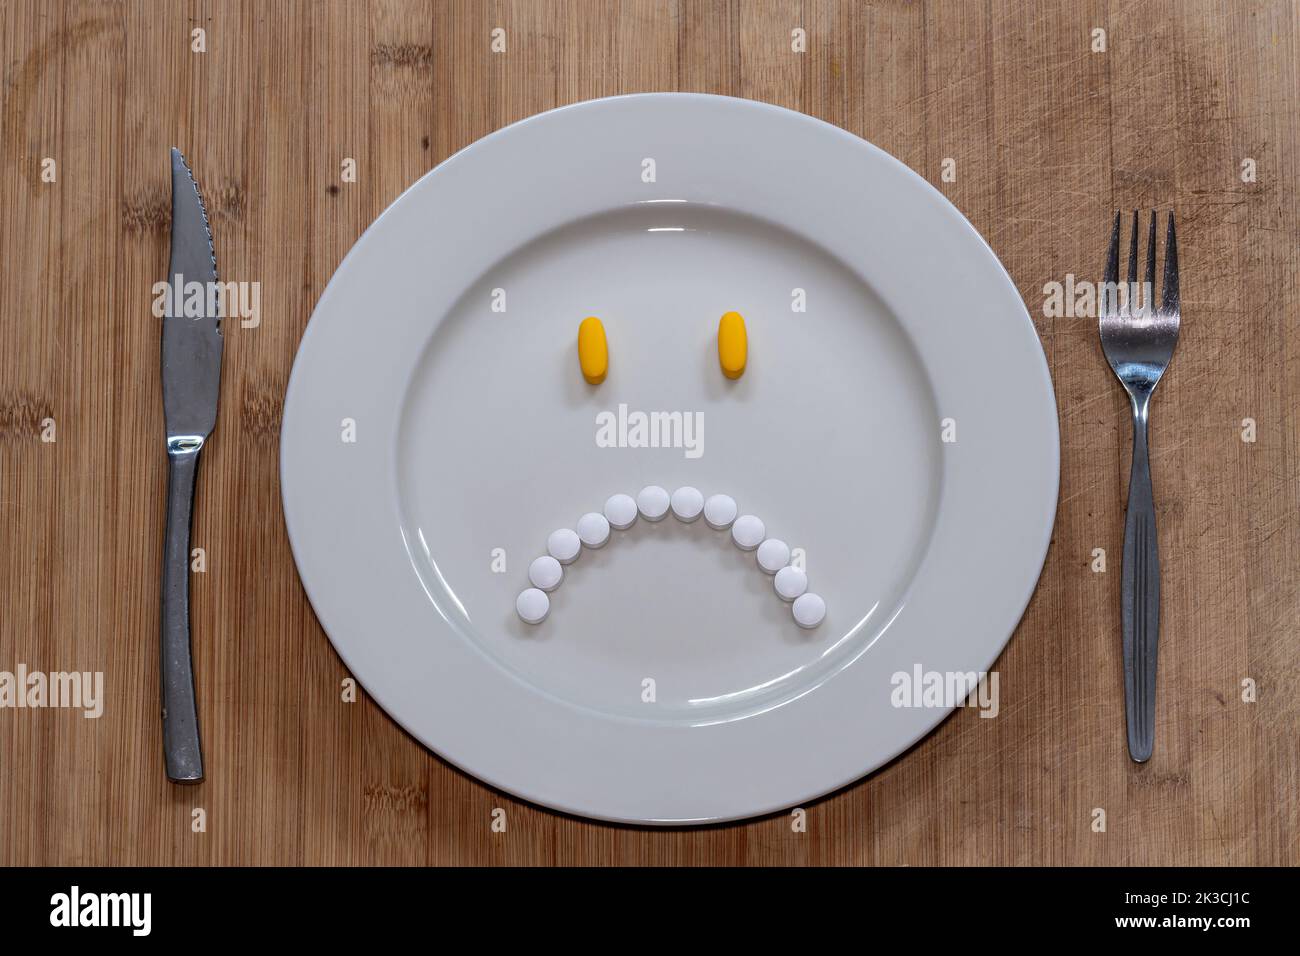 Pills on the plate in the shape of miserable and unhappy face, healthcare, dieting or taking medication concept Stock Photo